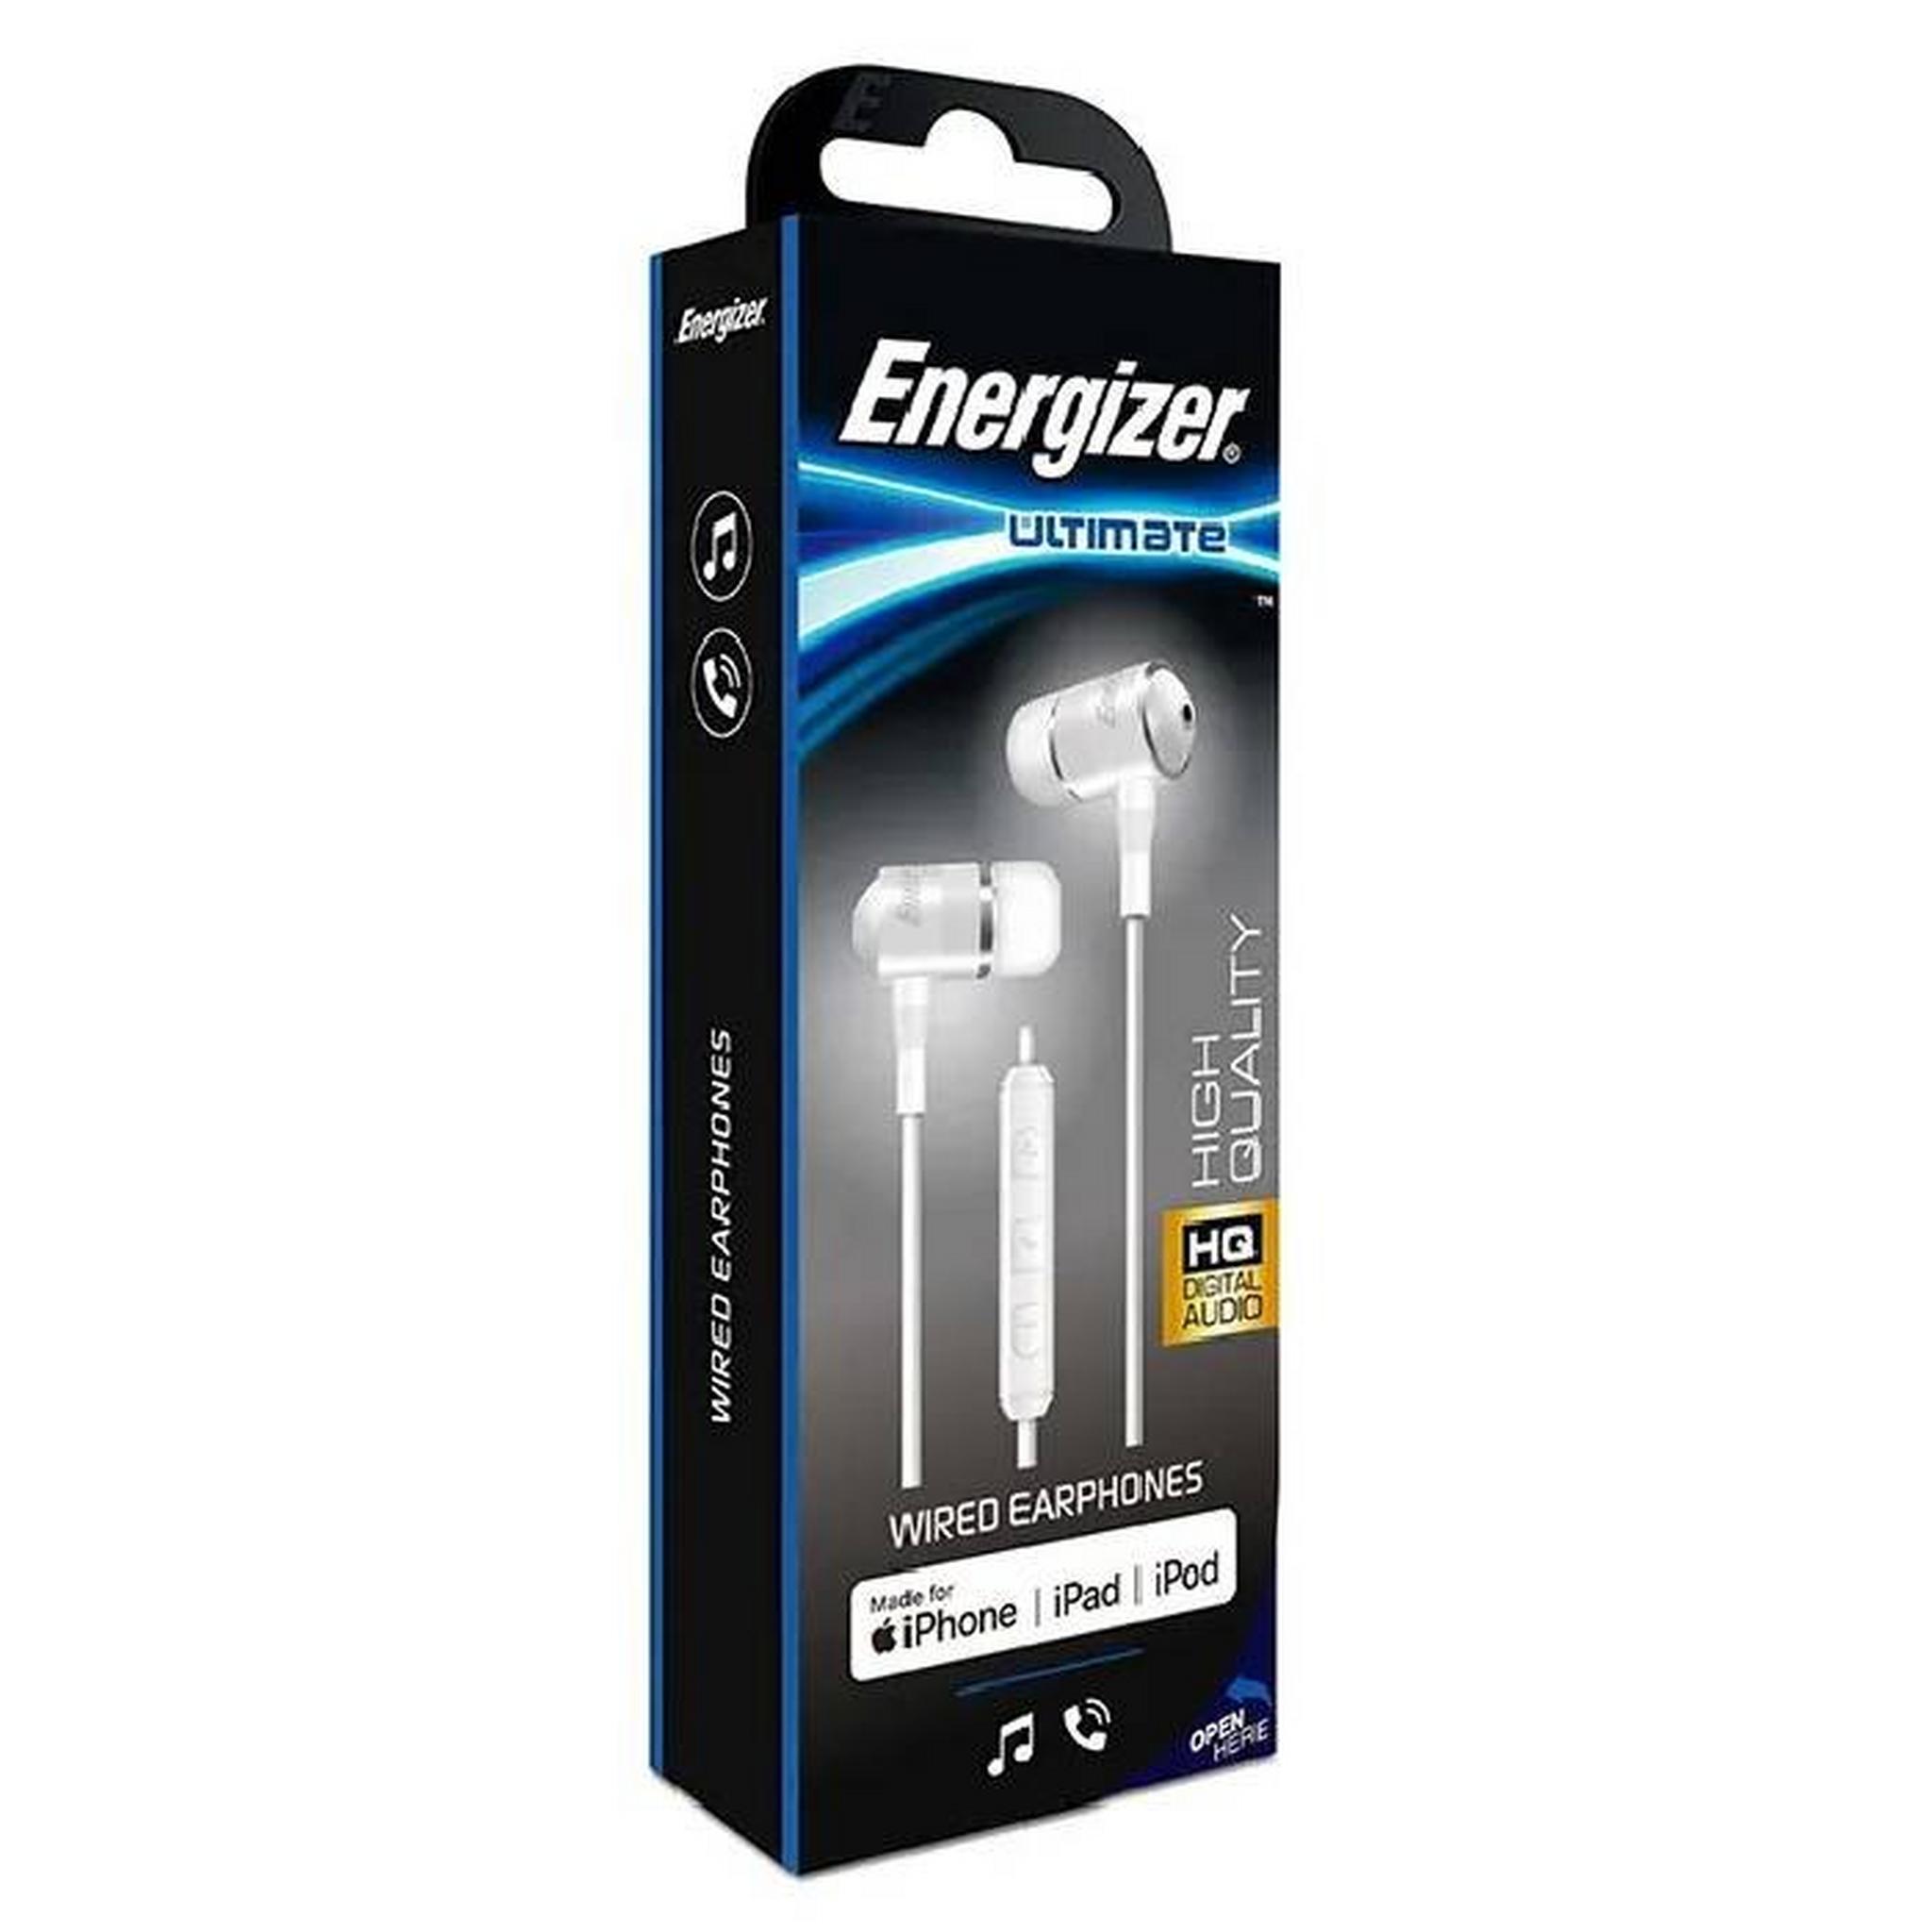 Energizer Wired Earphones 3.5mm Jack, UIL35WH - White